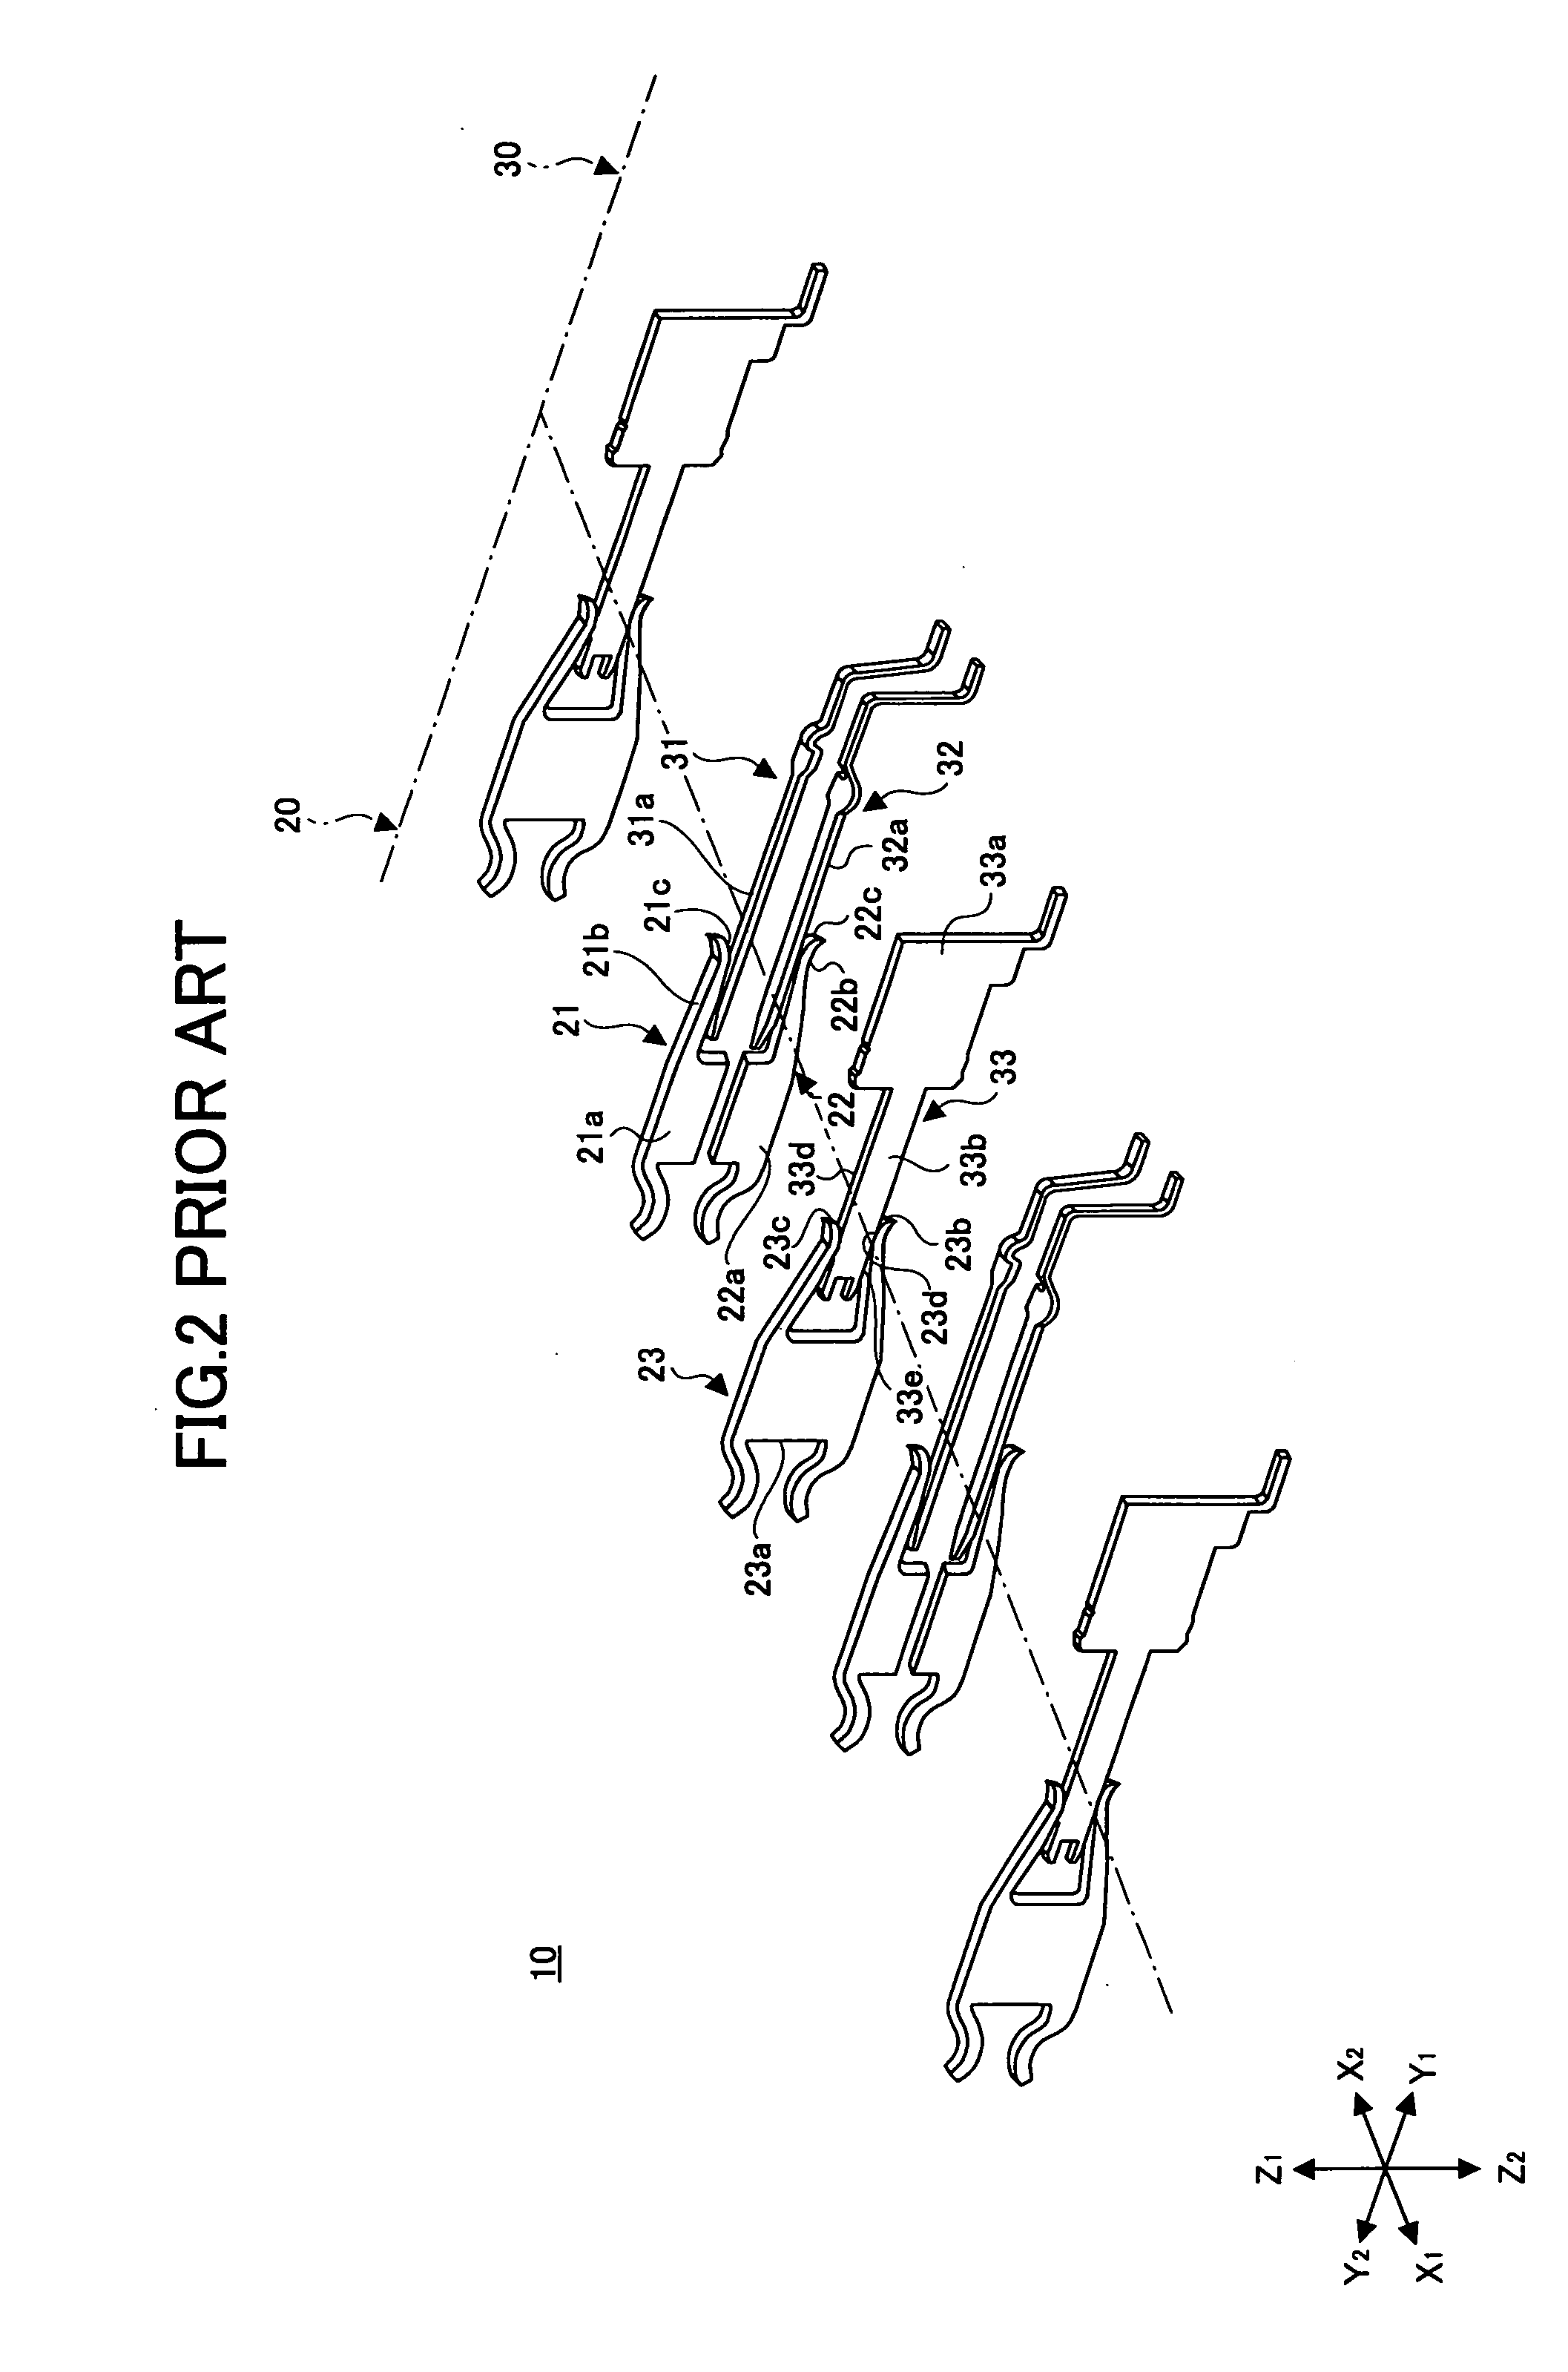 Connector unit for differential transmission